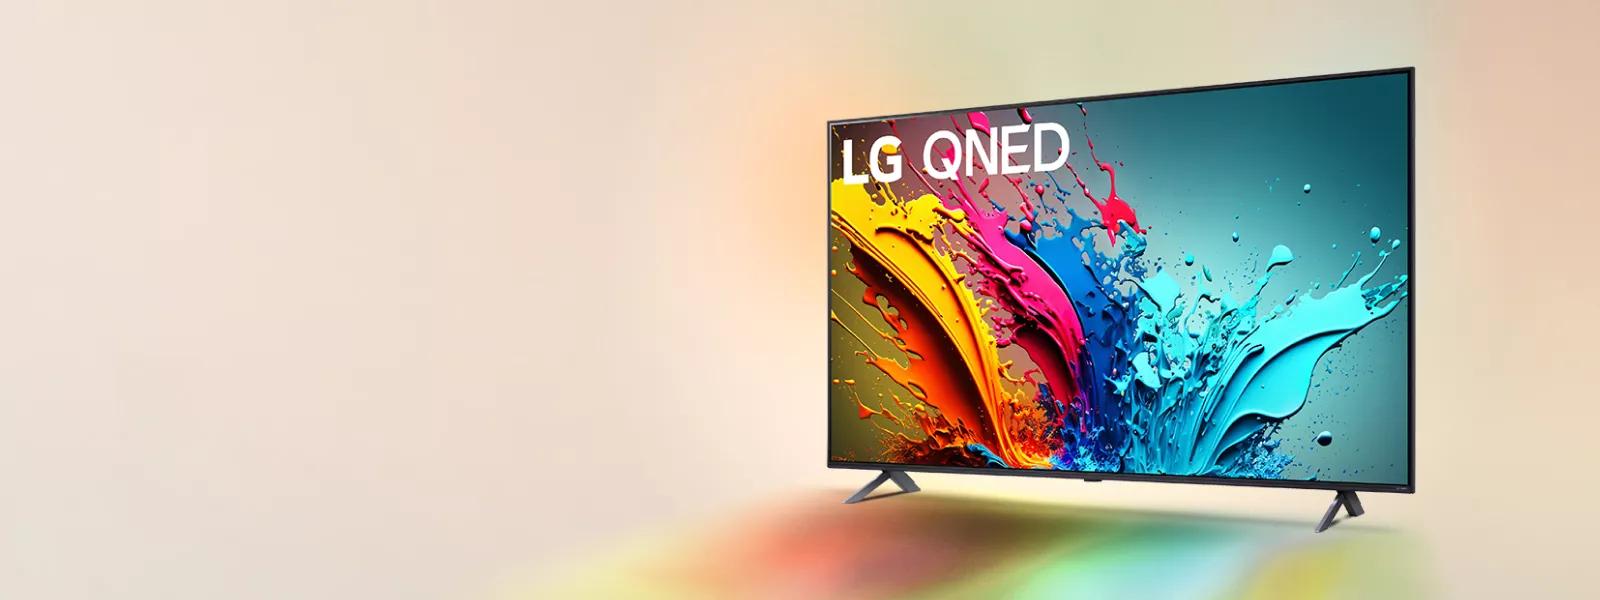 Explore a new frontier of color with our breathtakingly vivid QNED85T Series TVs.